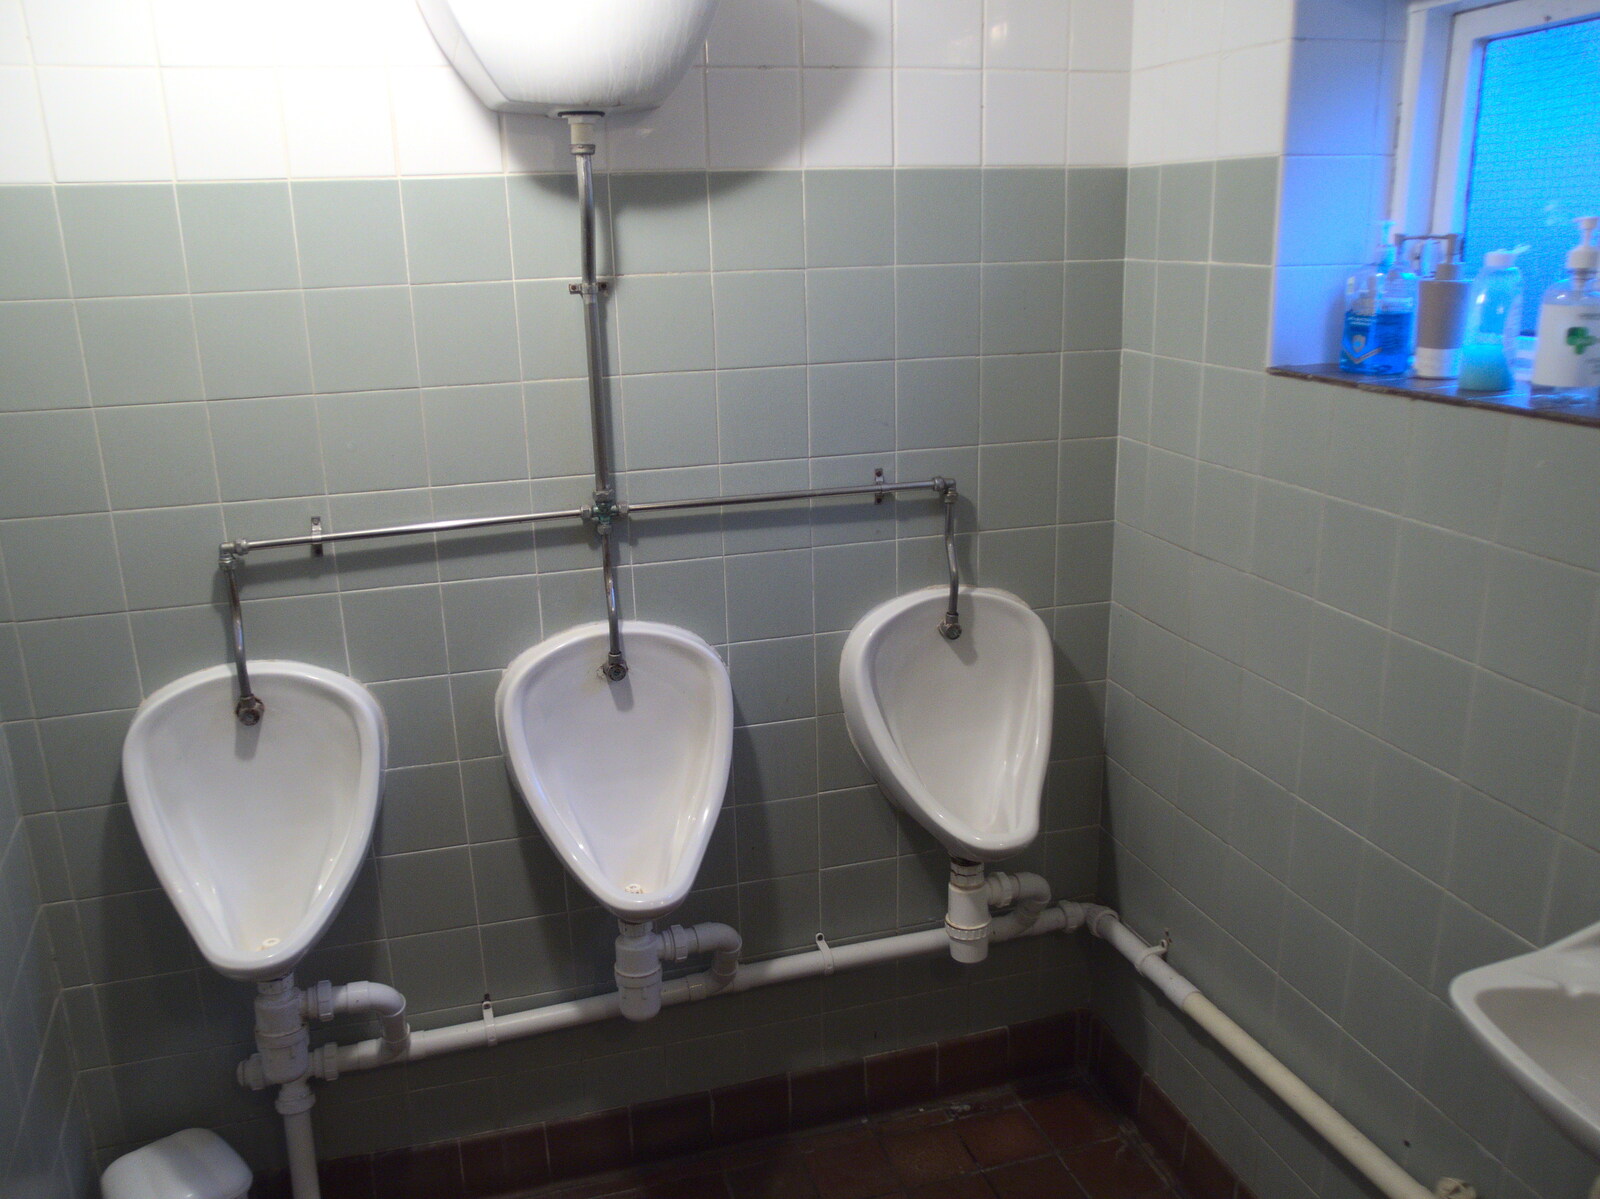 Urinals in standard pub three-up configuration from The BSCC at The Crown, Dickleburgh, Norfolk - 19th August 2021